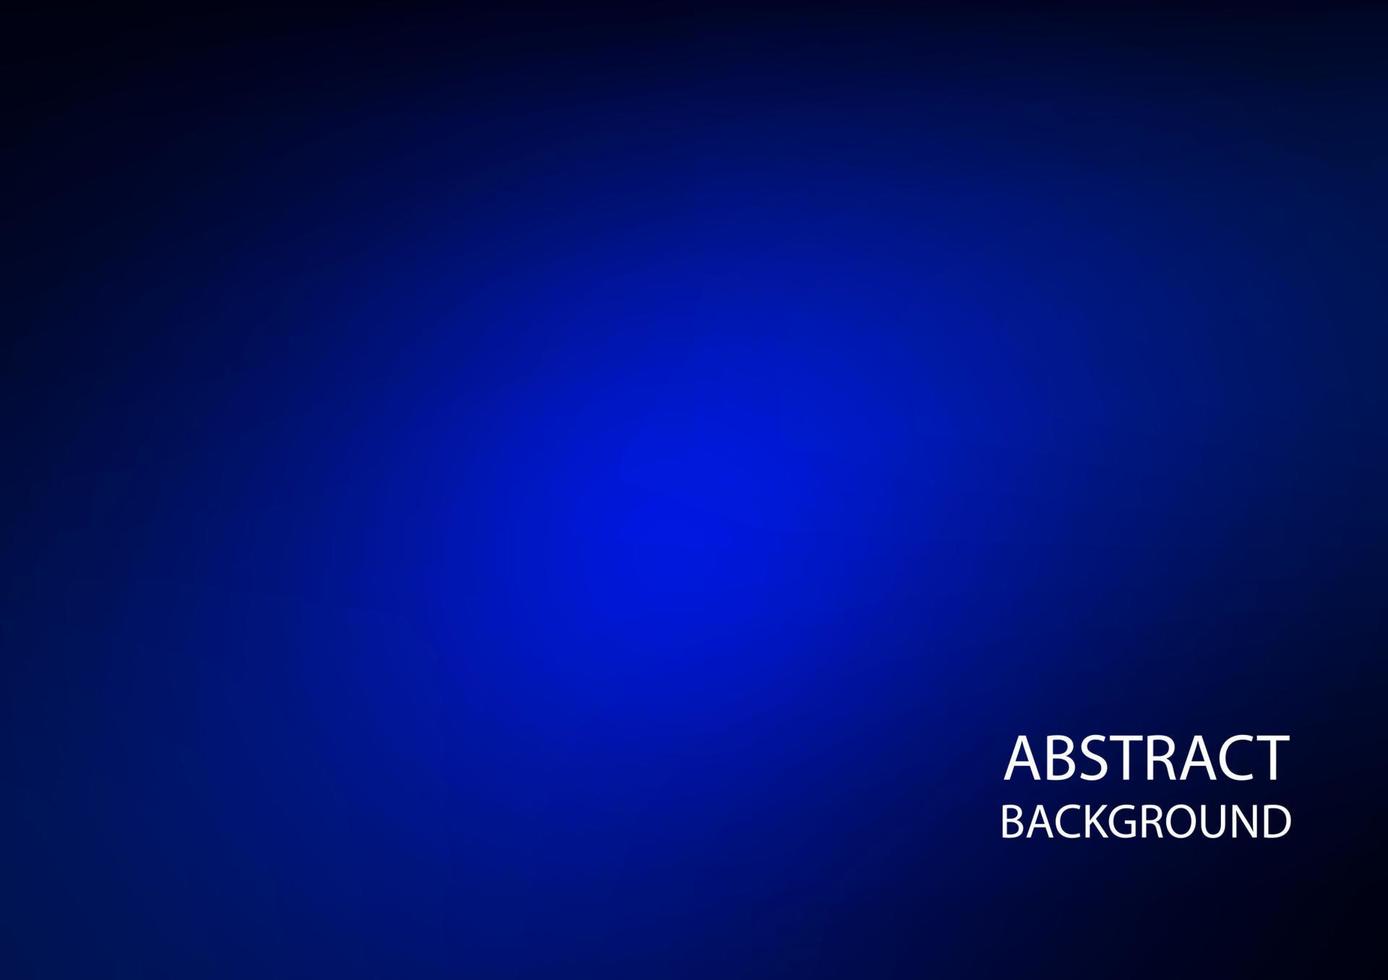 abstract background glow with blue background for wallpaper backdrop vector illustration